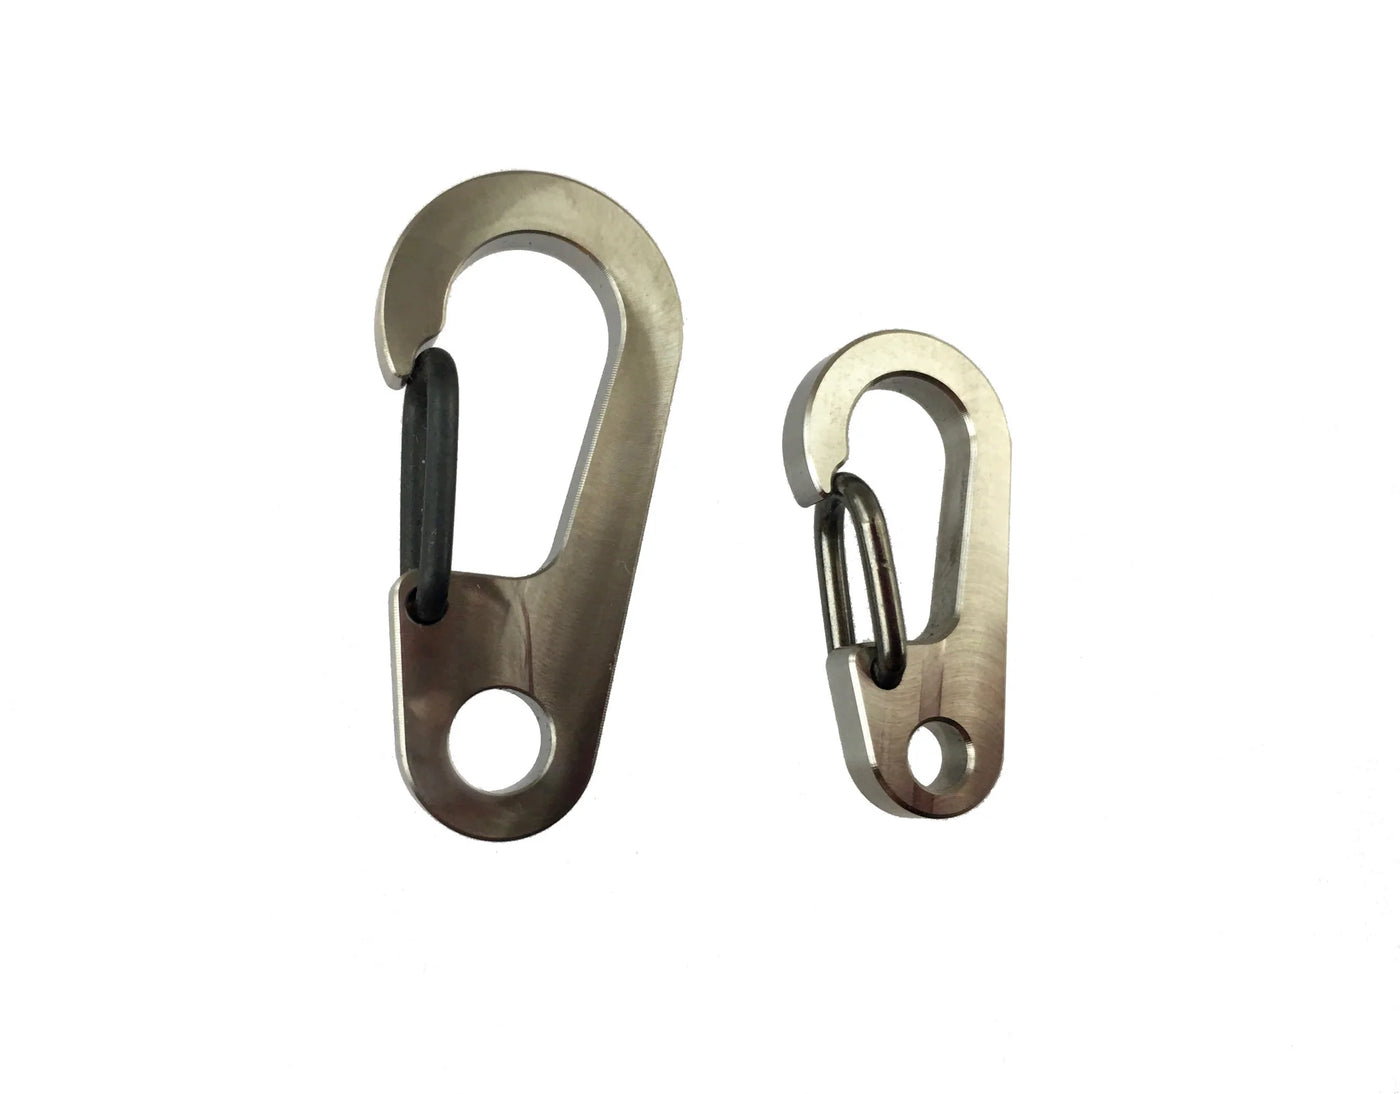 Countycomm - Flat Gate Clips by Maratac®